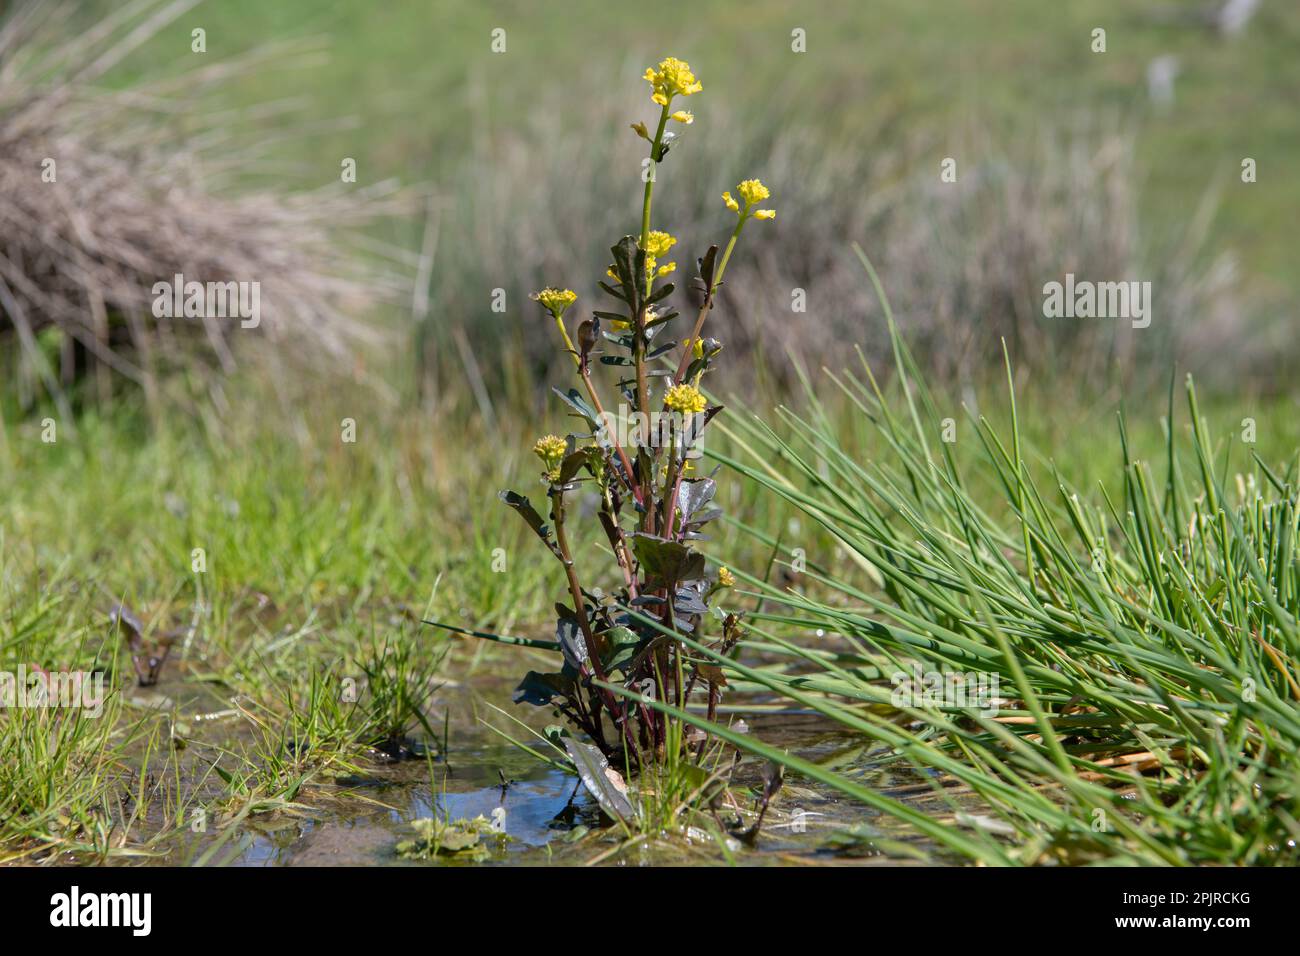 American Yellowrocket, Barbarea orthoceras, growing and flowering in a wet meadow in Santa Clara county, California, USA. Stock Photo